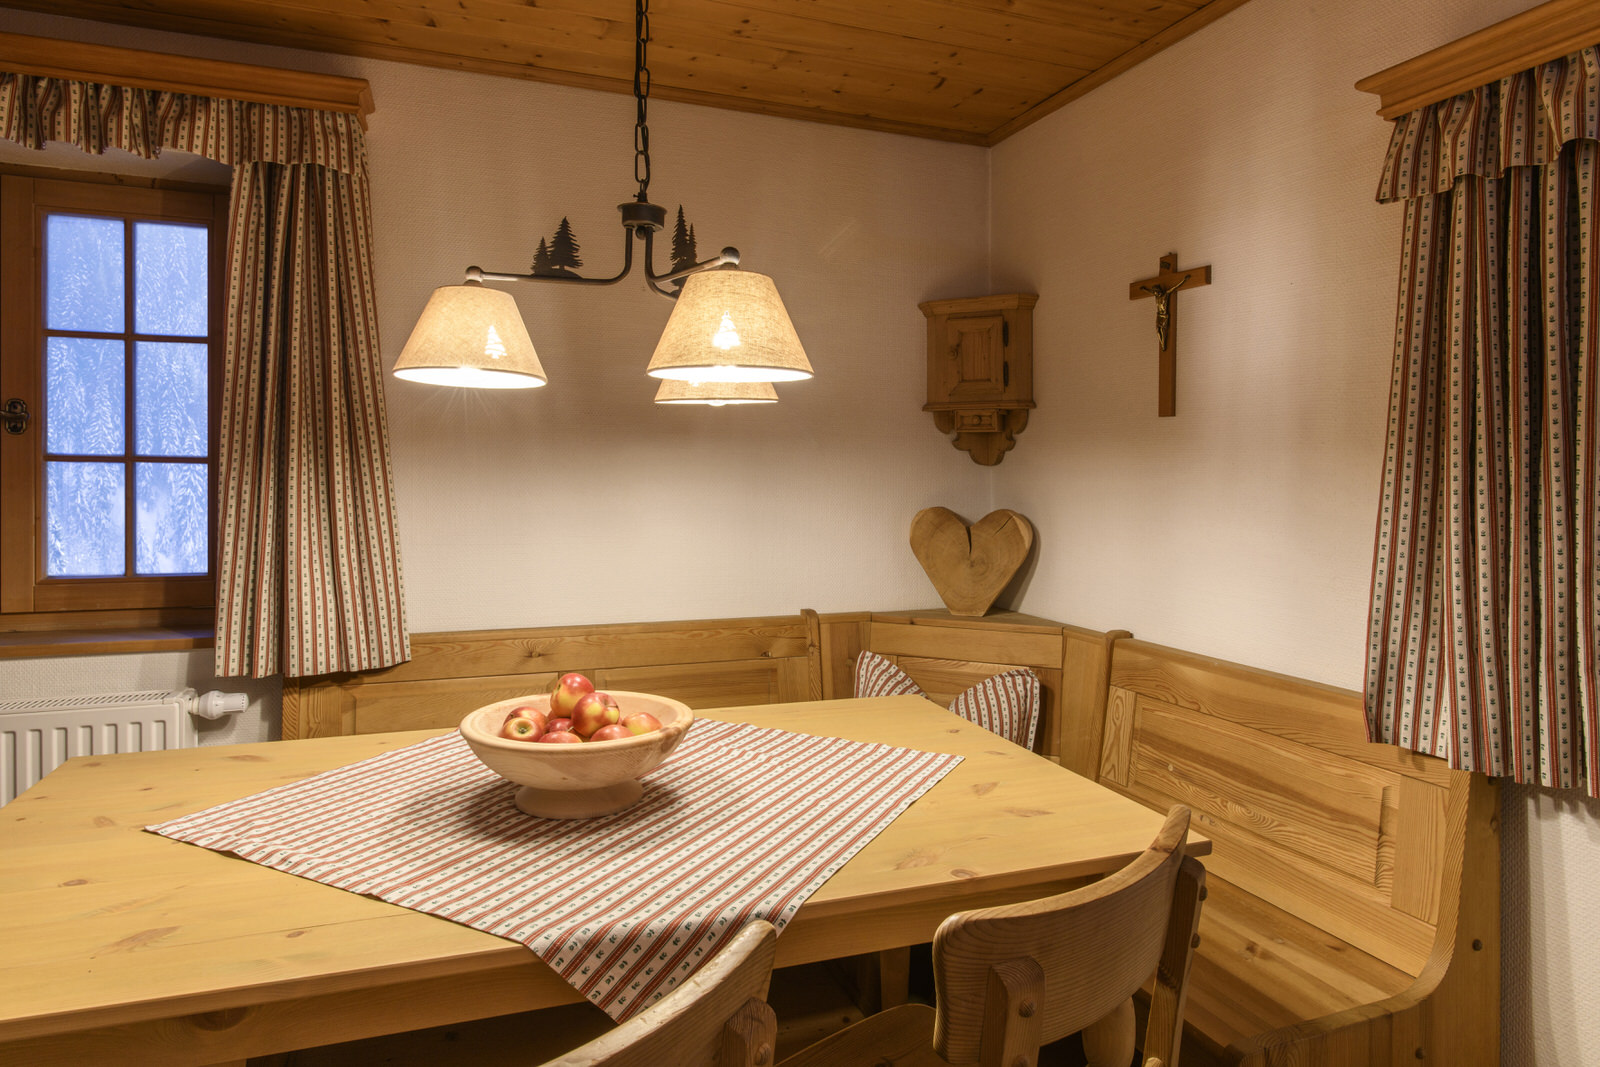 Bärenwald country lodge in the Montafon - living